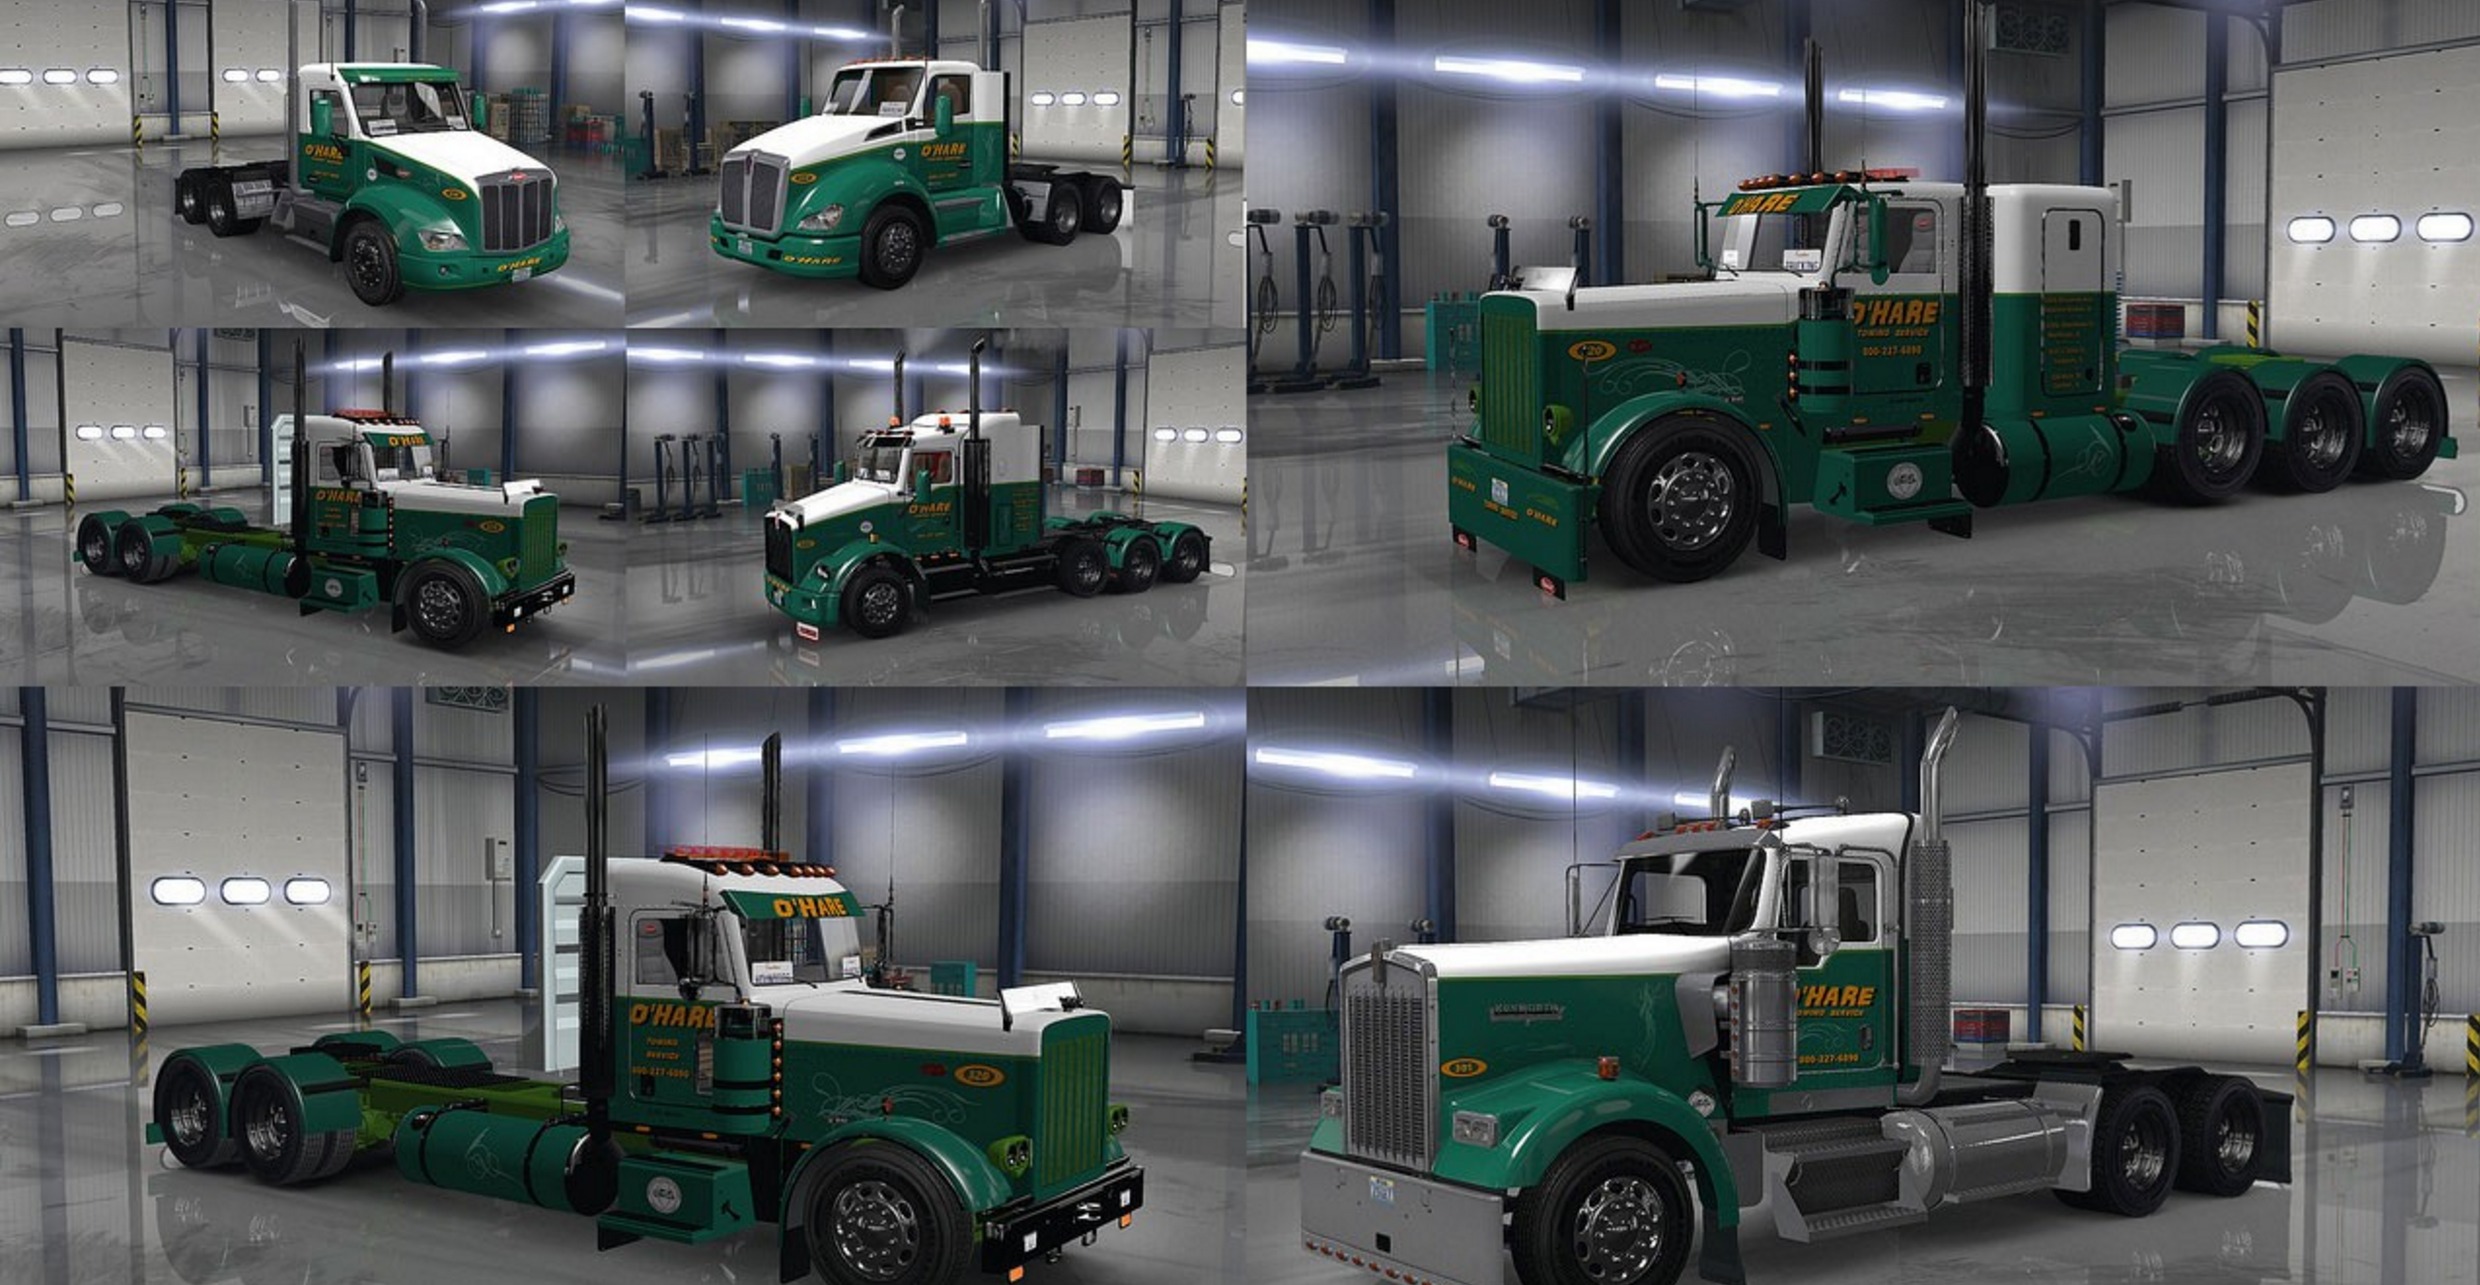 O’HARE Towing SERVICE skins